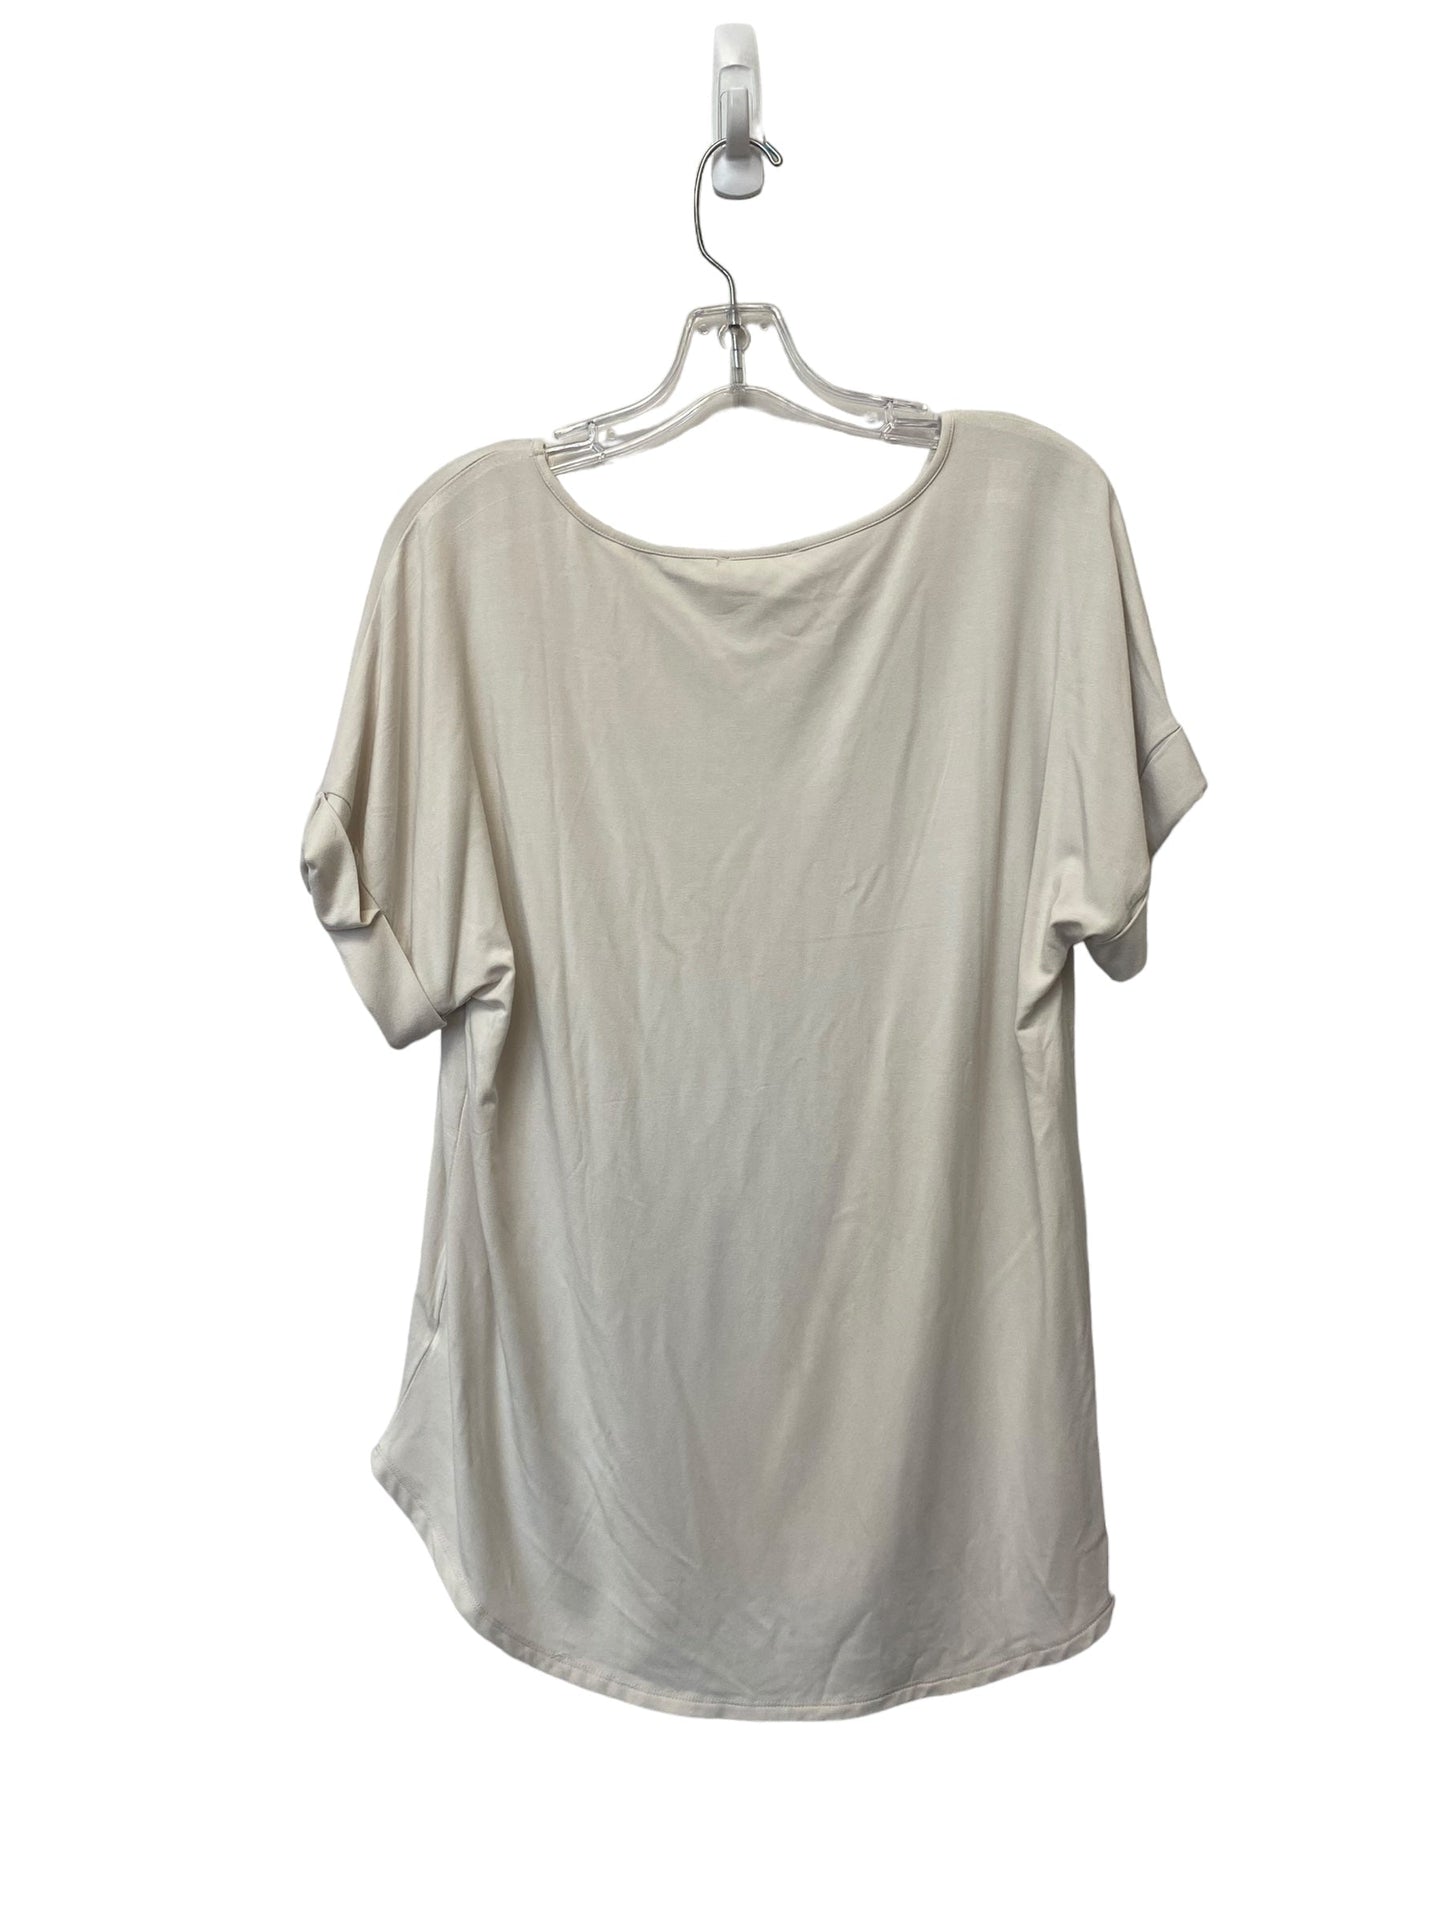 White Top Short Sleeve Basic Zenana Outfitters, Size L